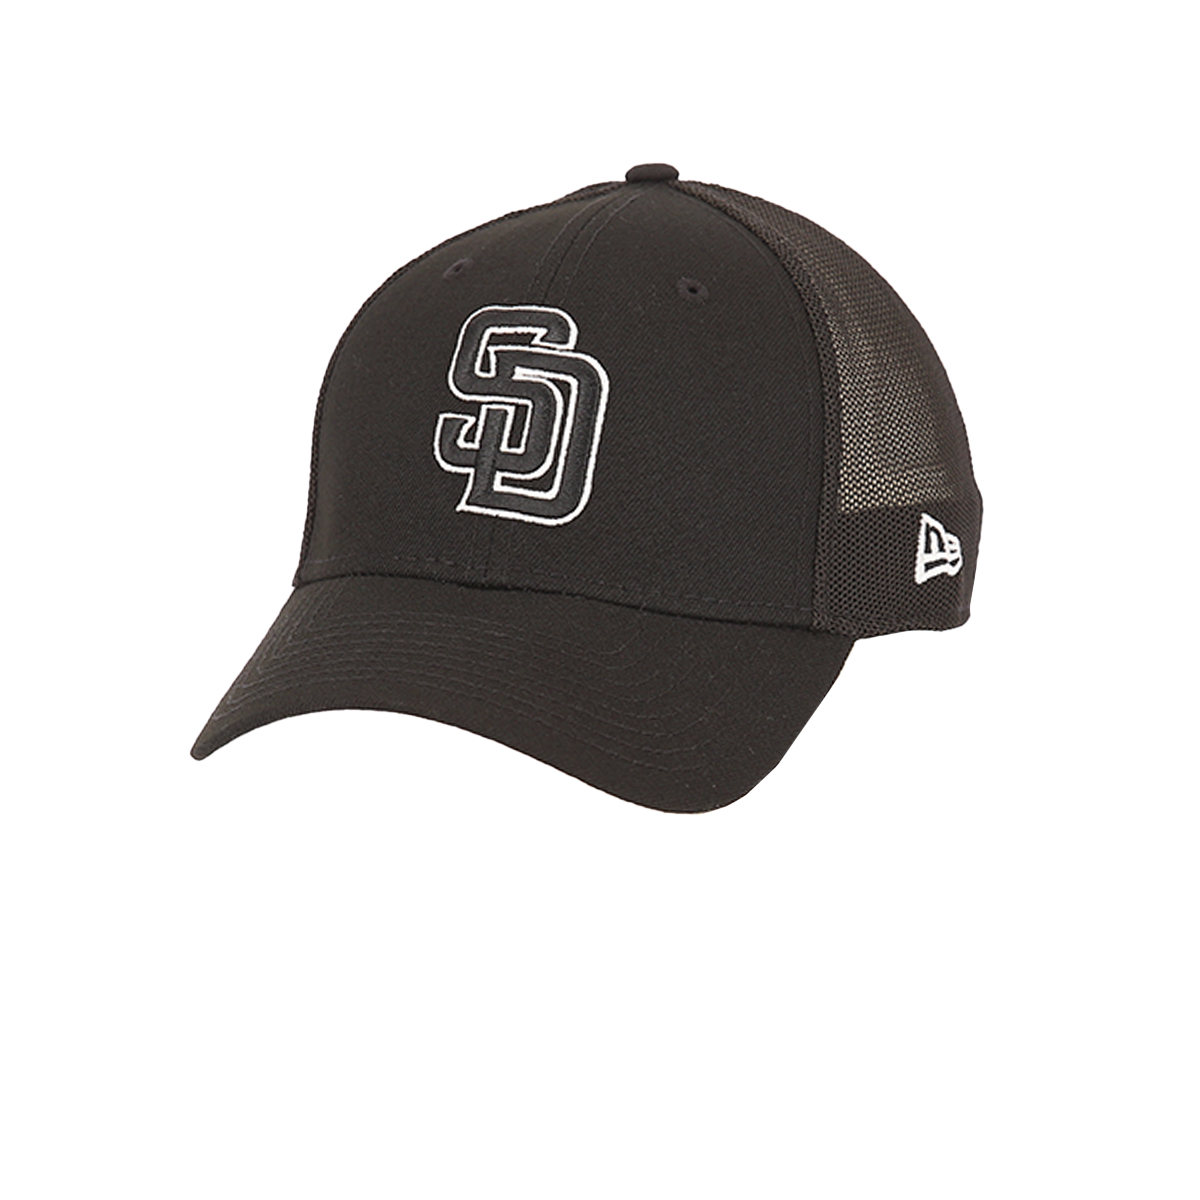 Gorra New Era The League Sadpad,  image number null